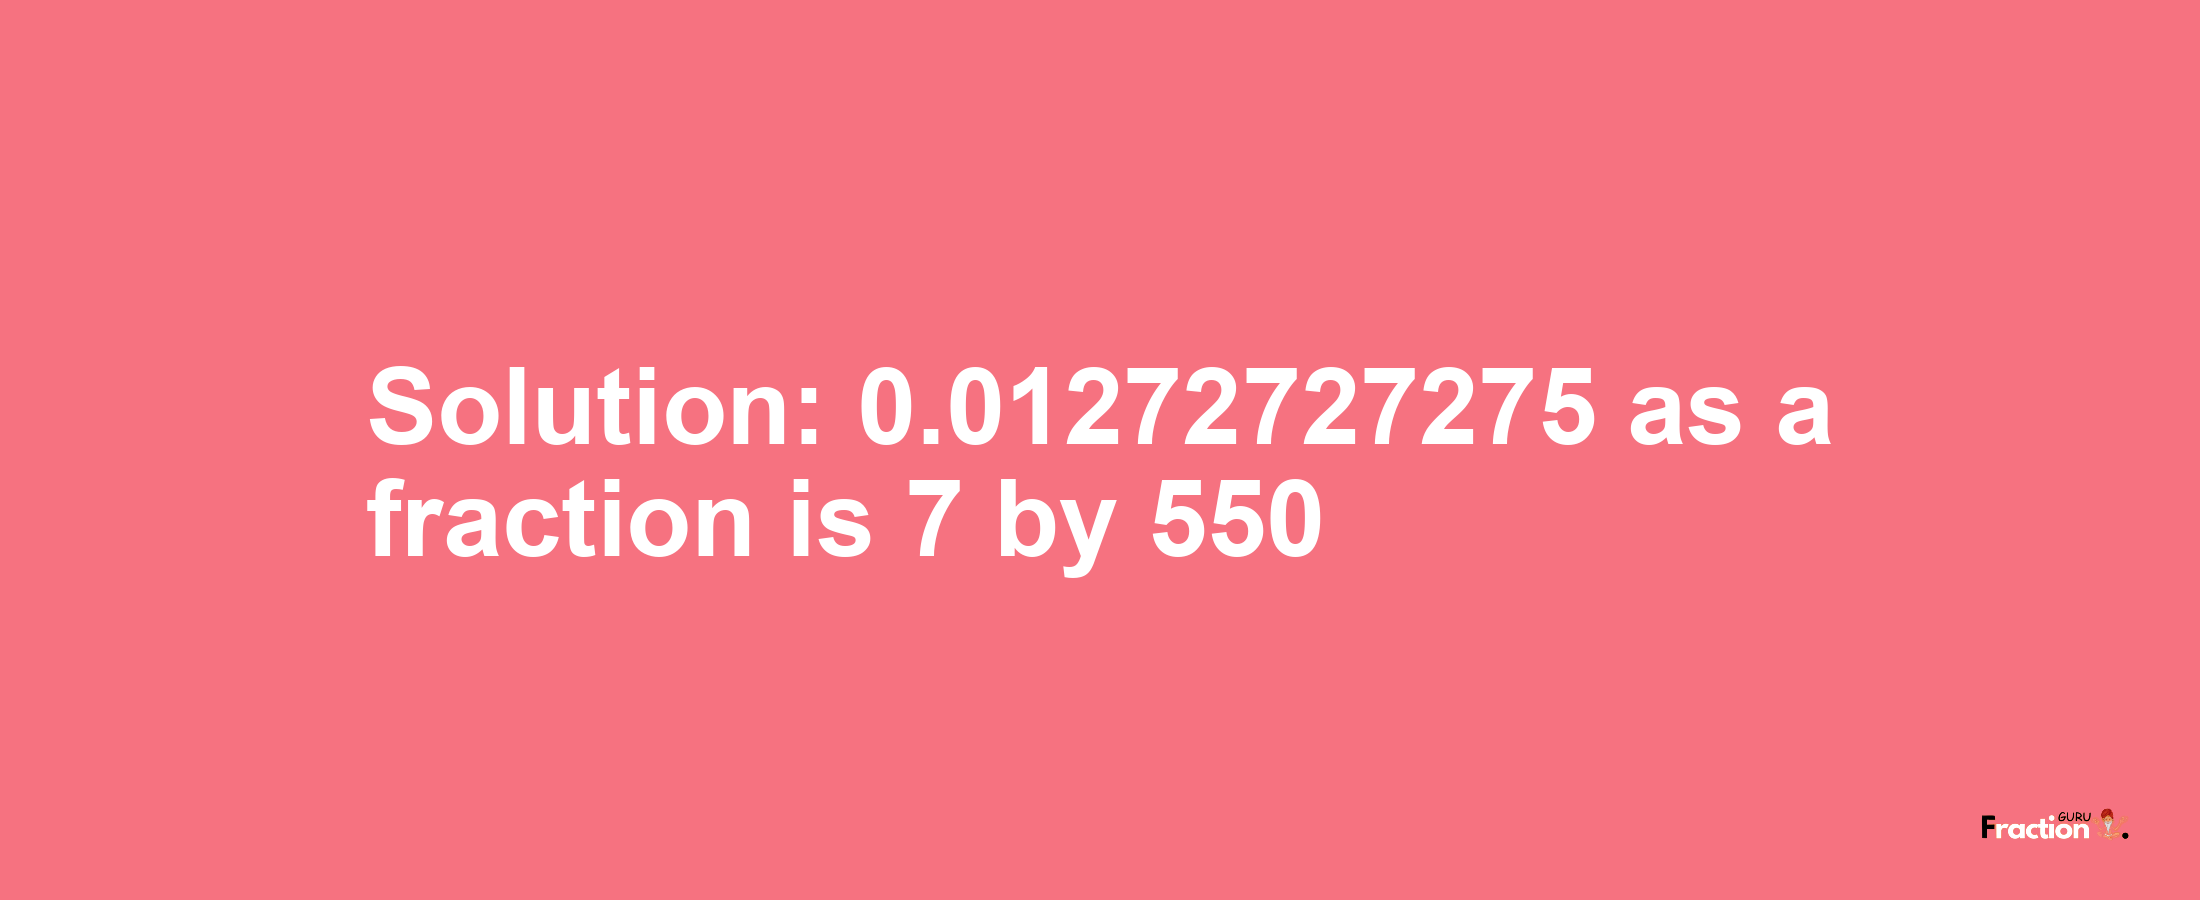 Solution:0.01272727275 as a fraction is 7/550